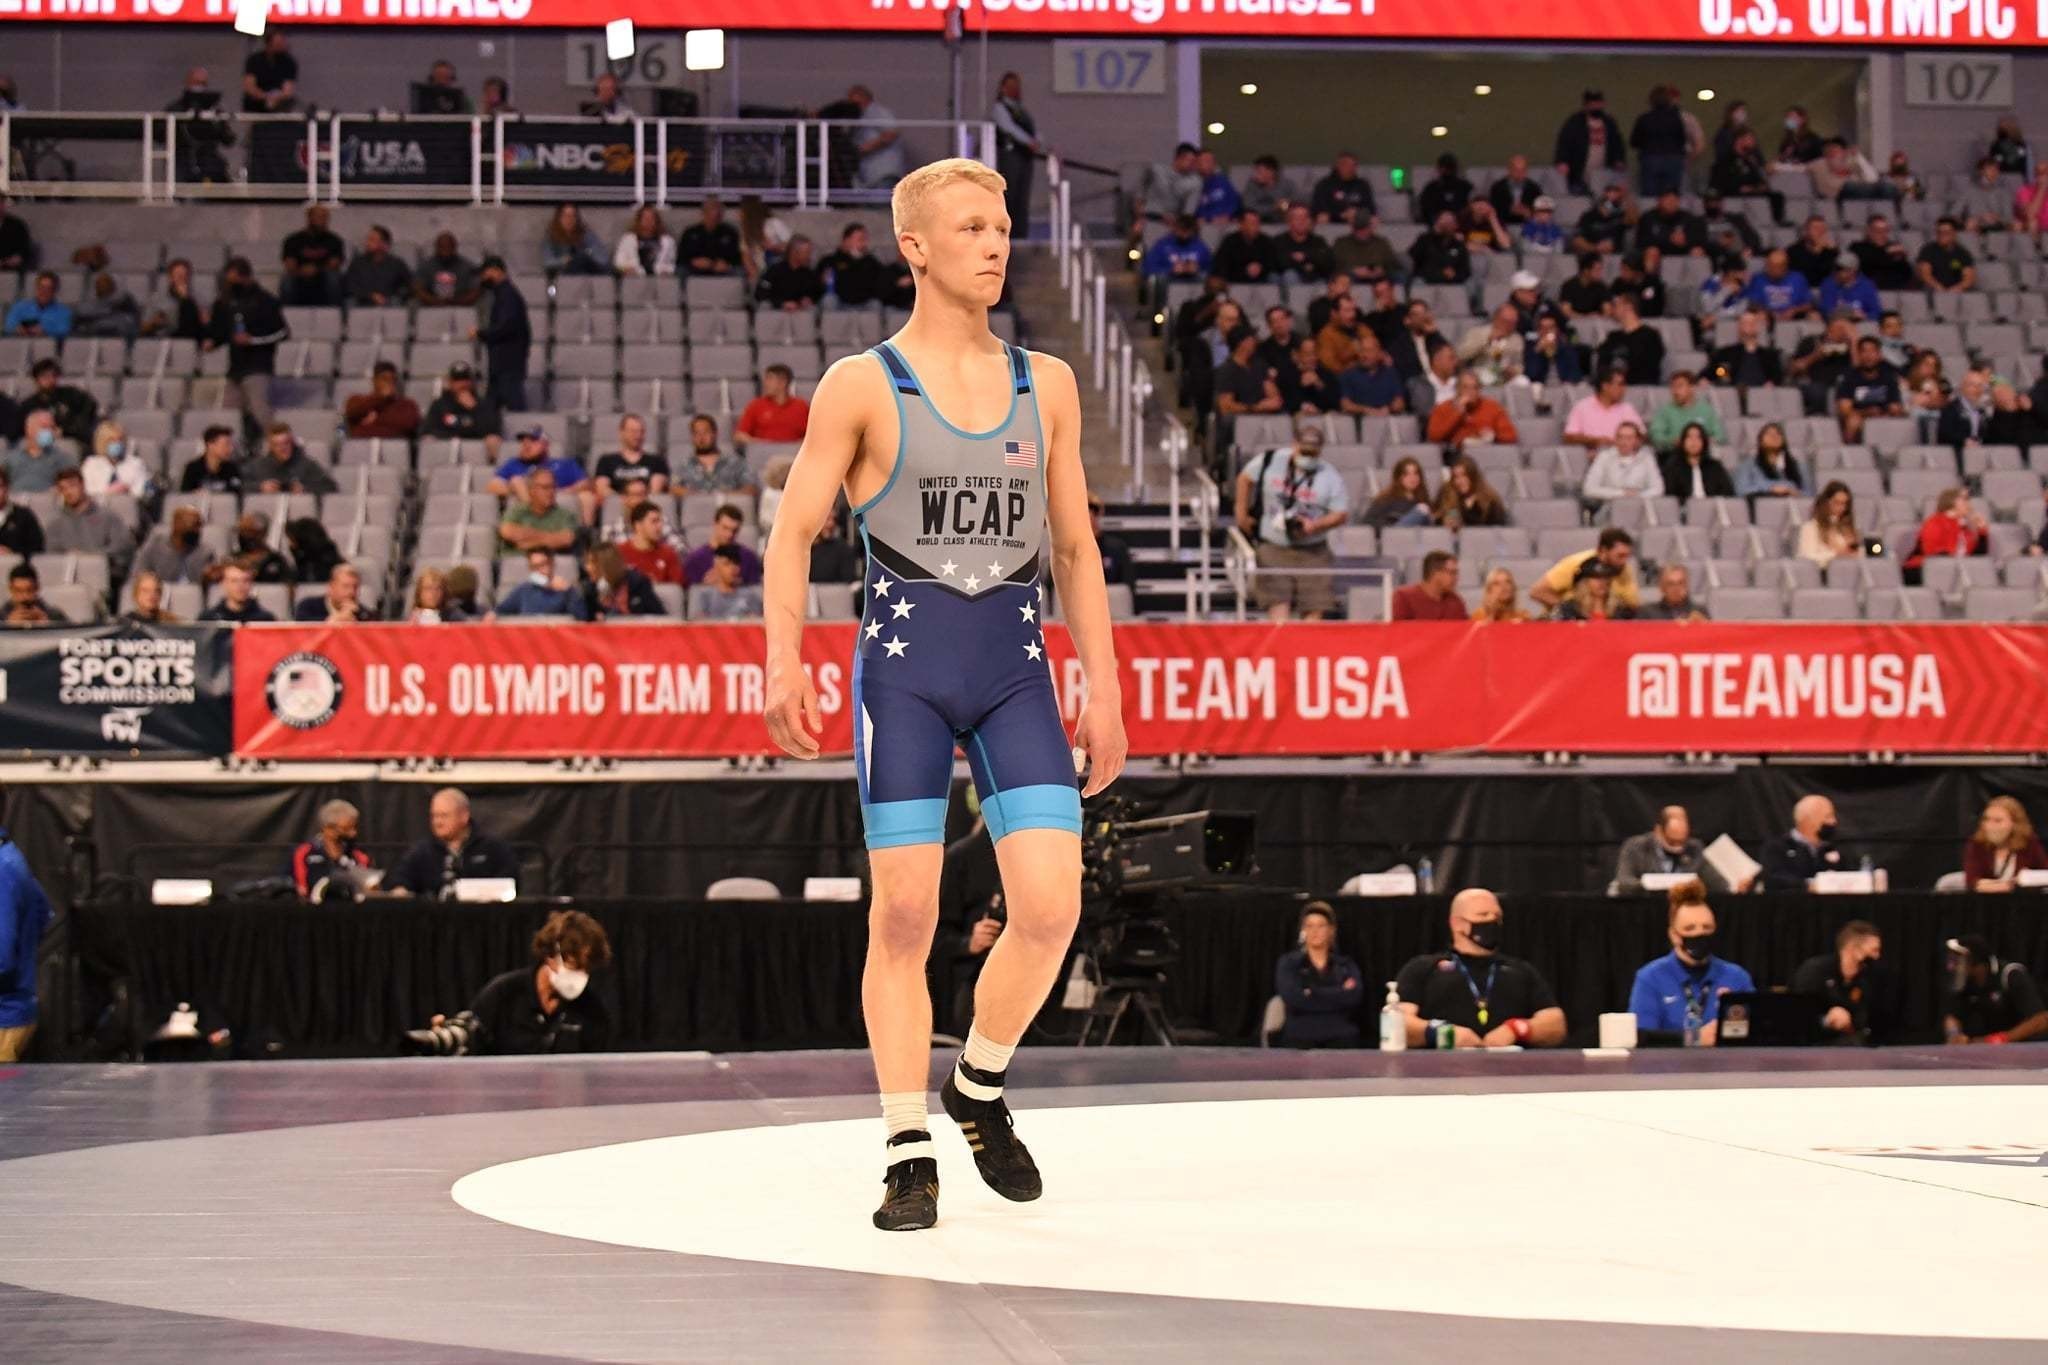 Three Soldiers headed to Wrestling World Championship Article The